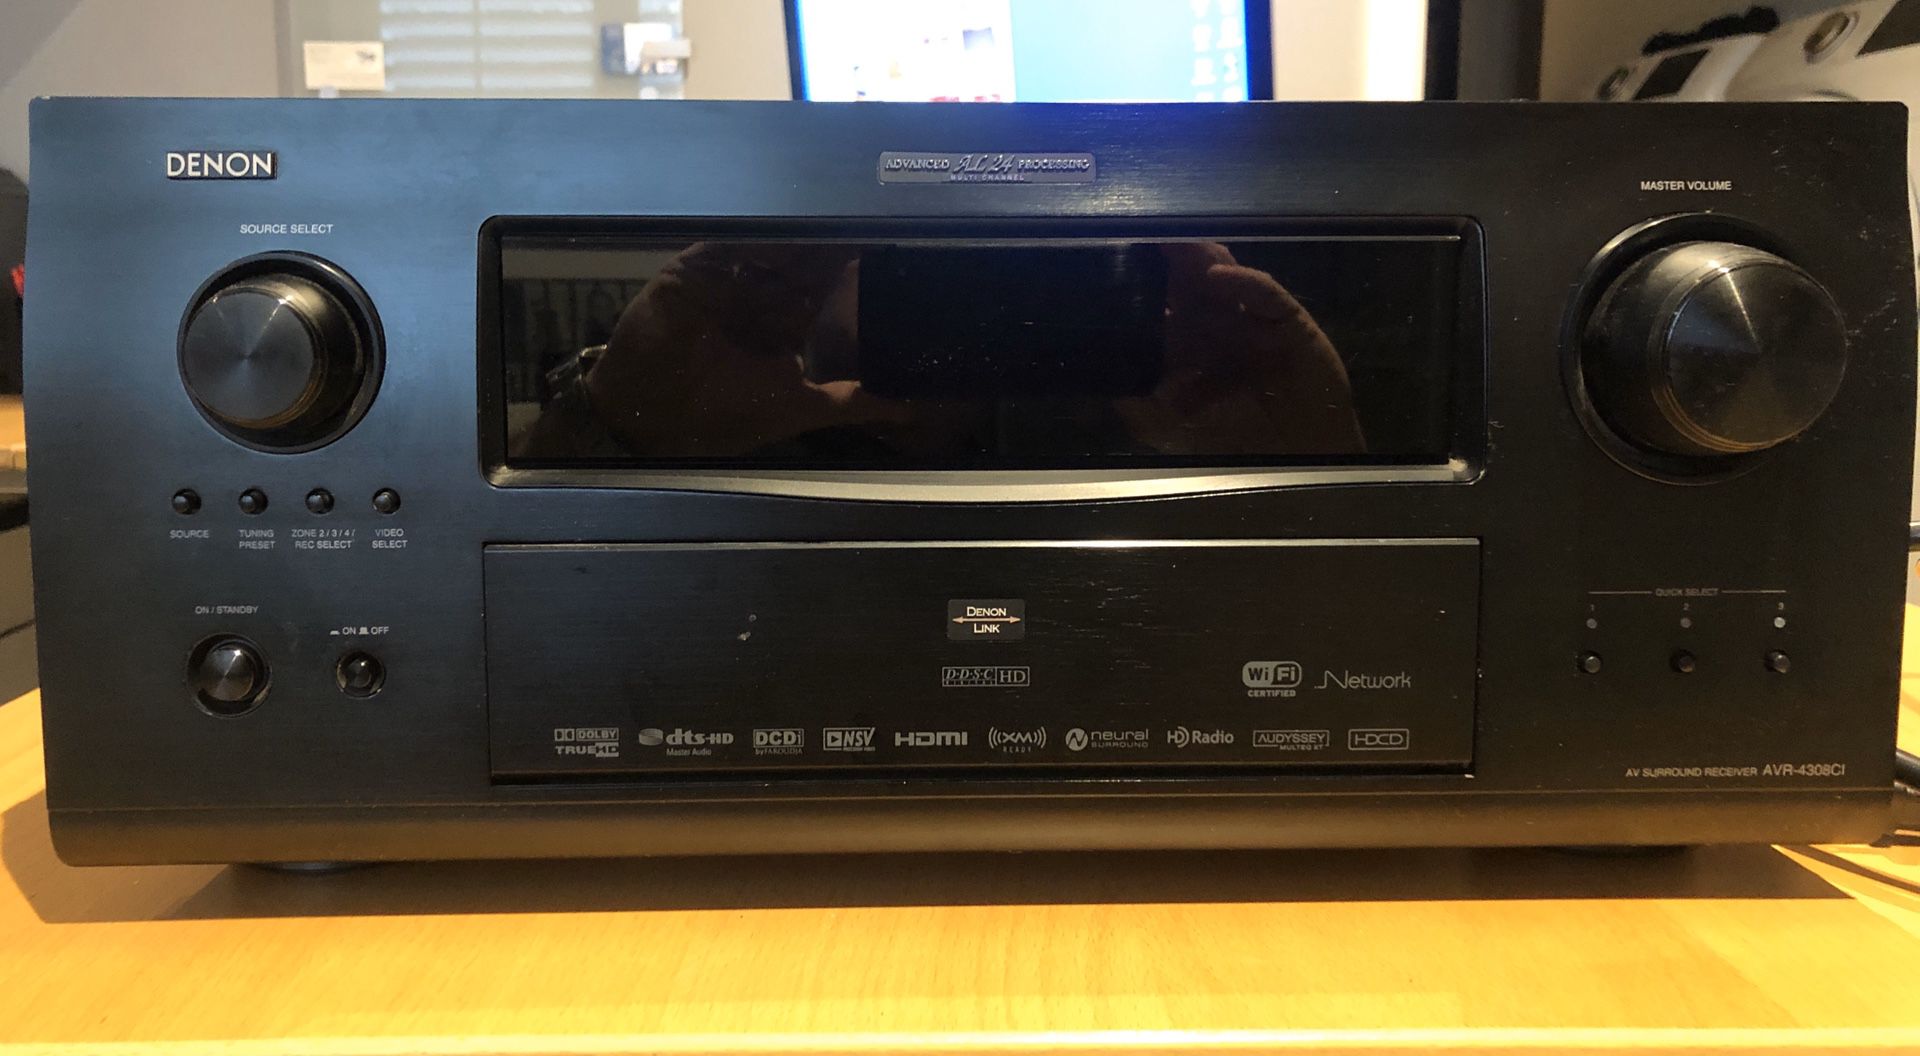 Denon 4308Ci Receiver with Remote, Audussey Mic and AM loop antenna